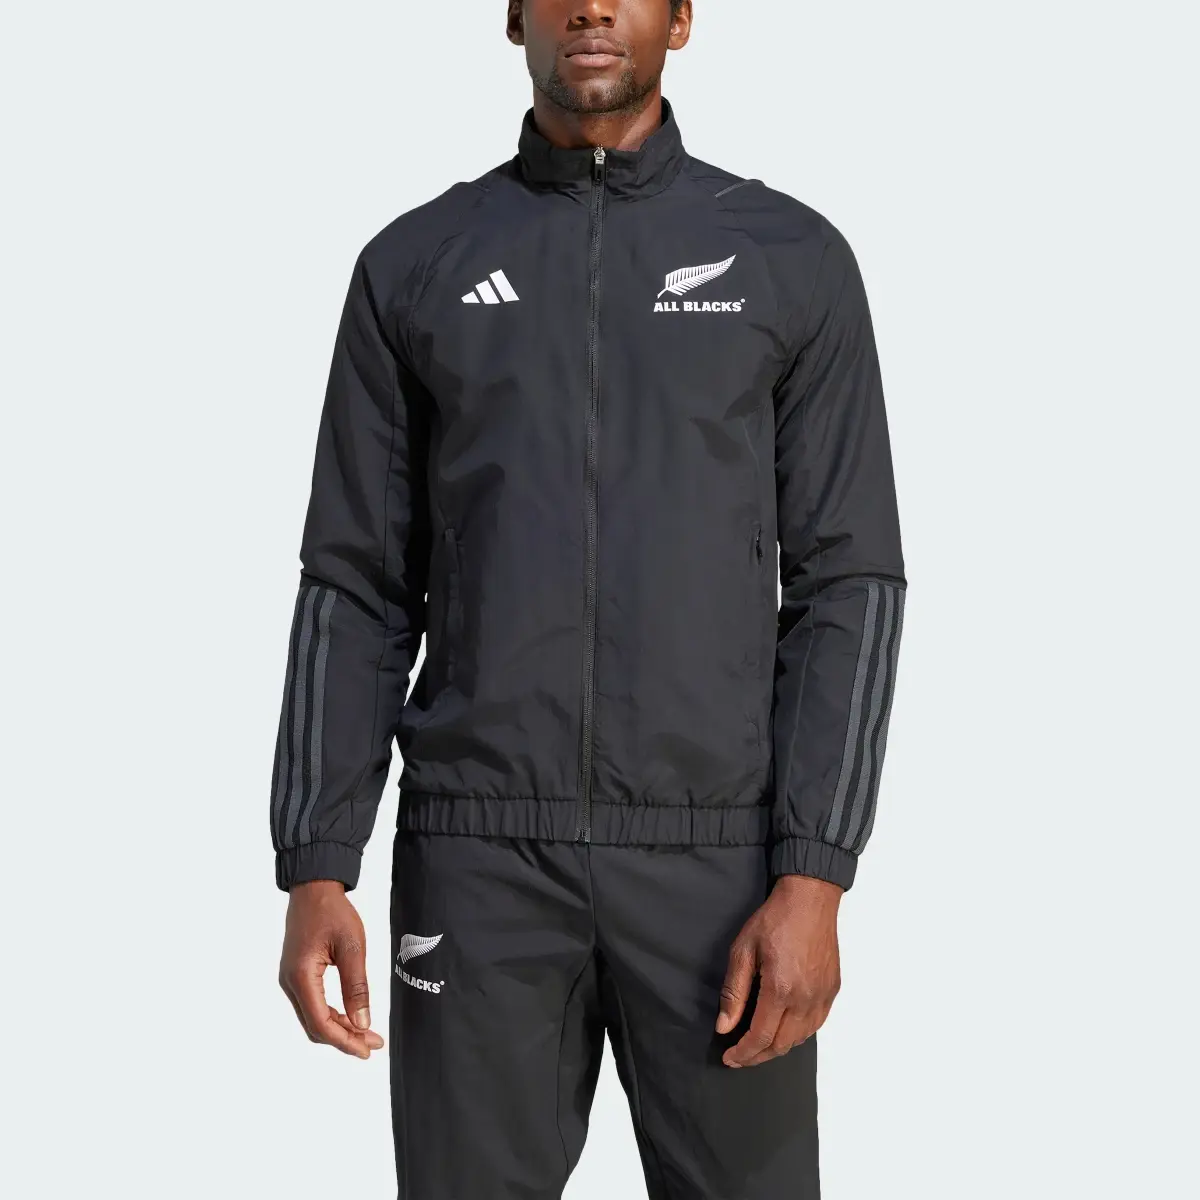 Adidas All Blacks Rugby Track Suit Track Top. 1